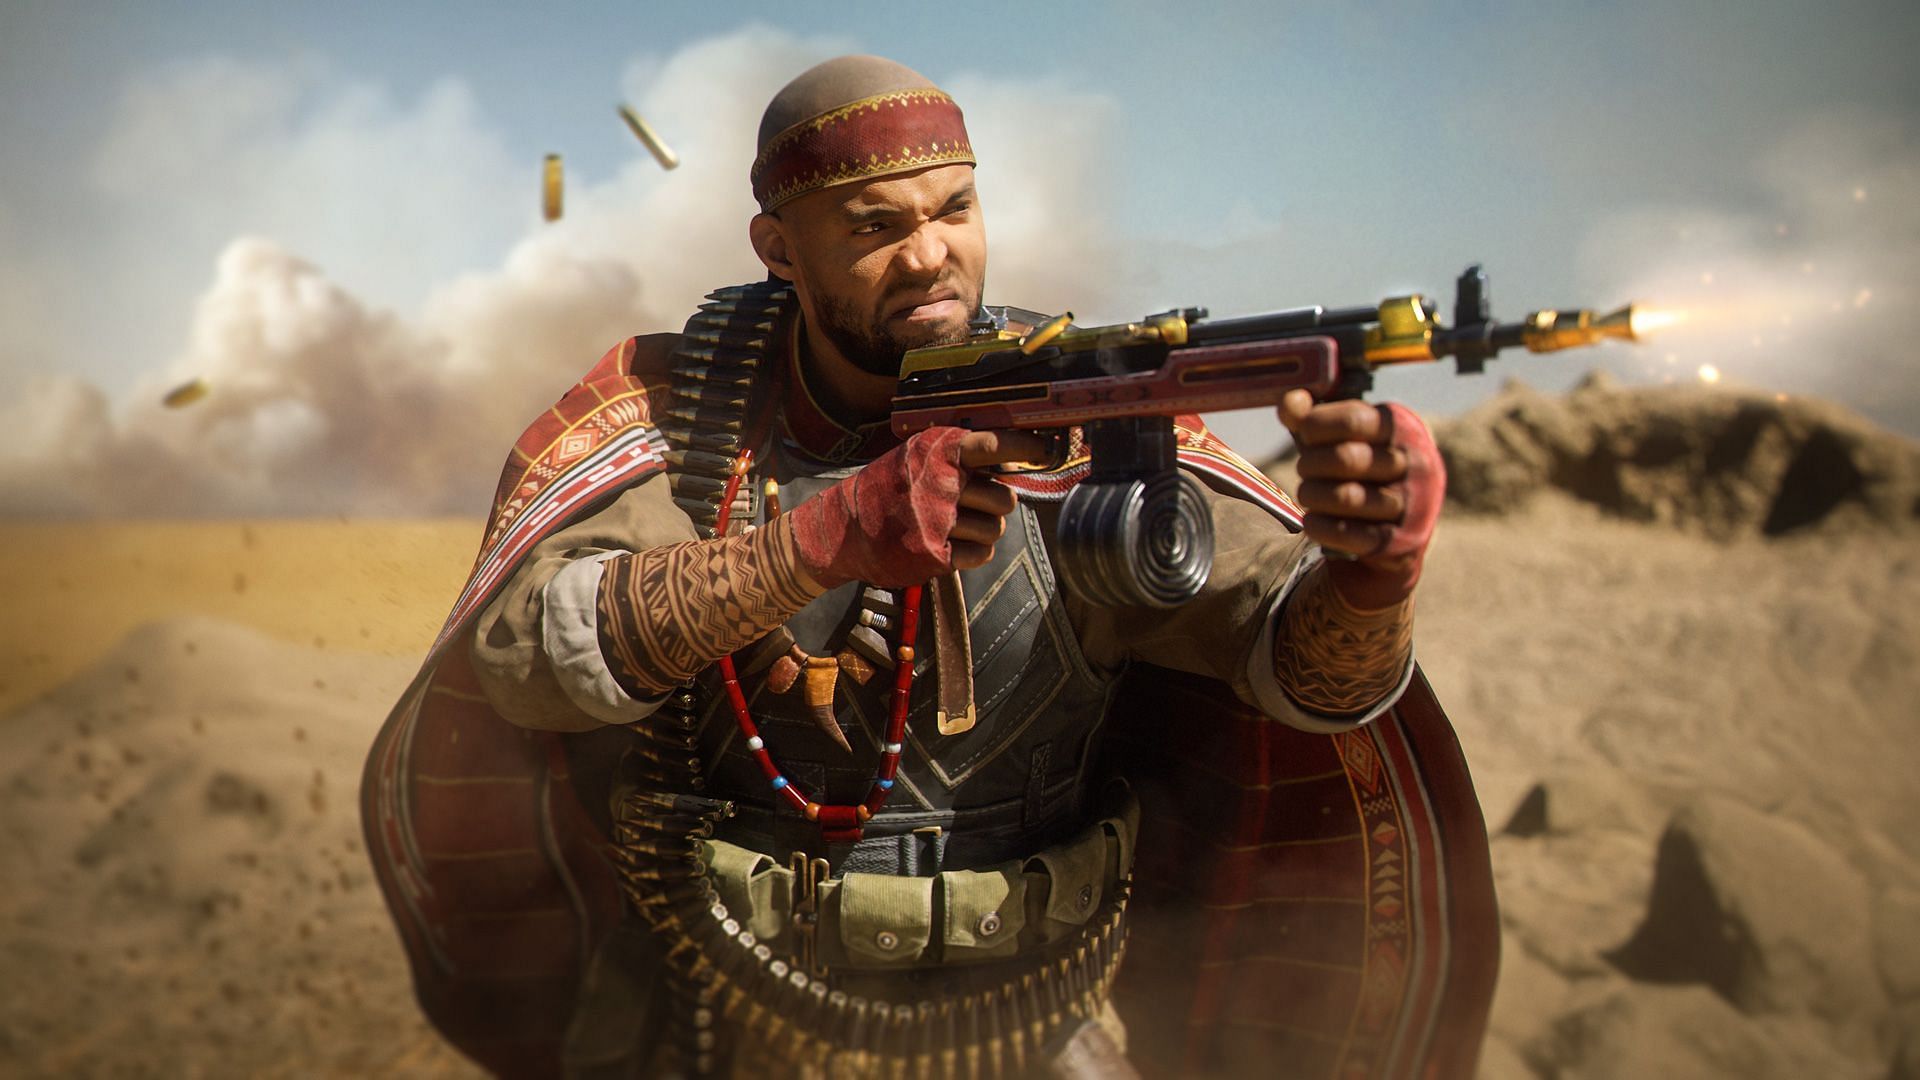 Ikenna Olowe is ready to apply his wits in Season 4 (Image via Activision)